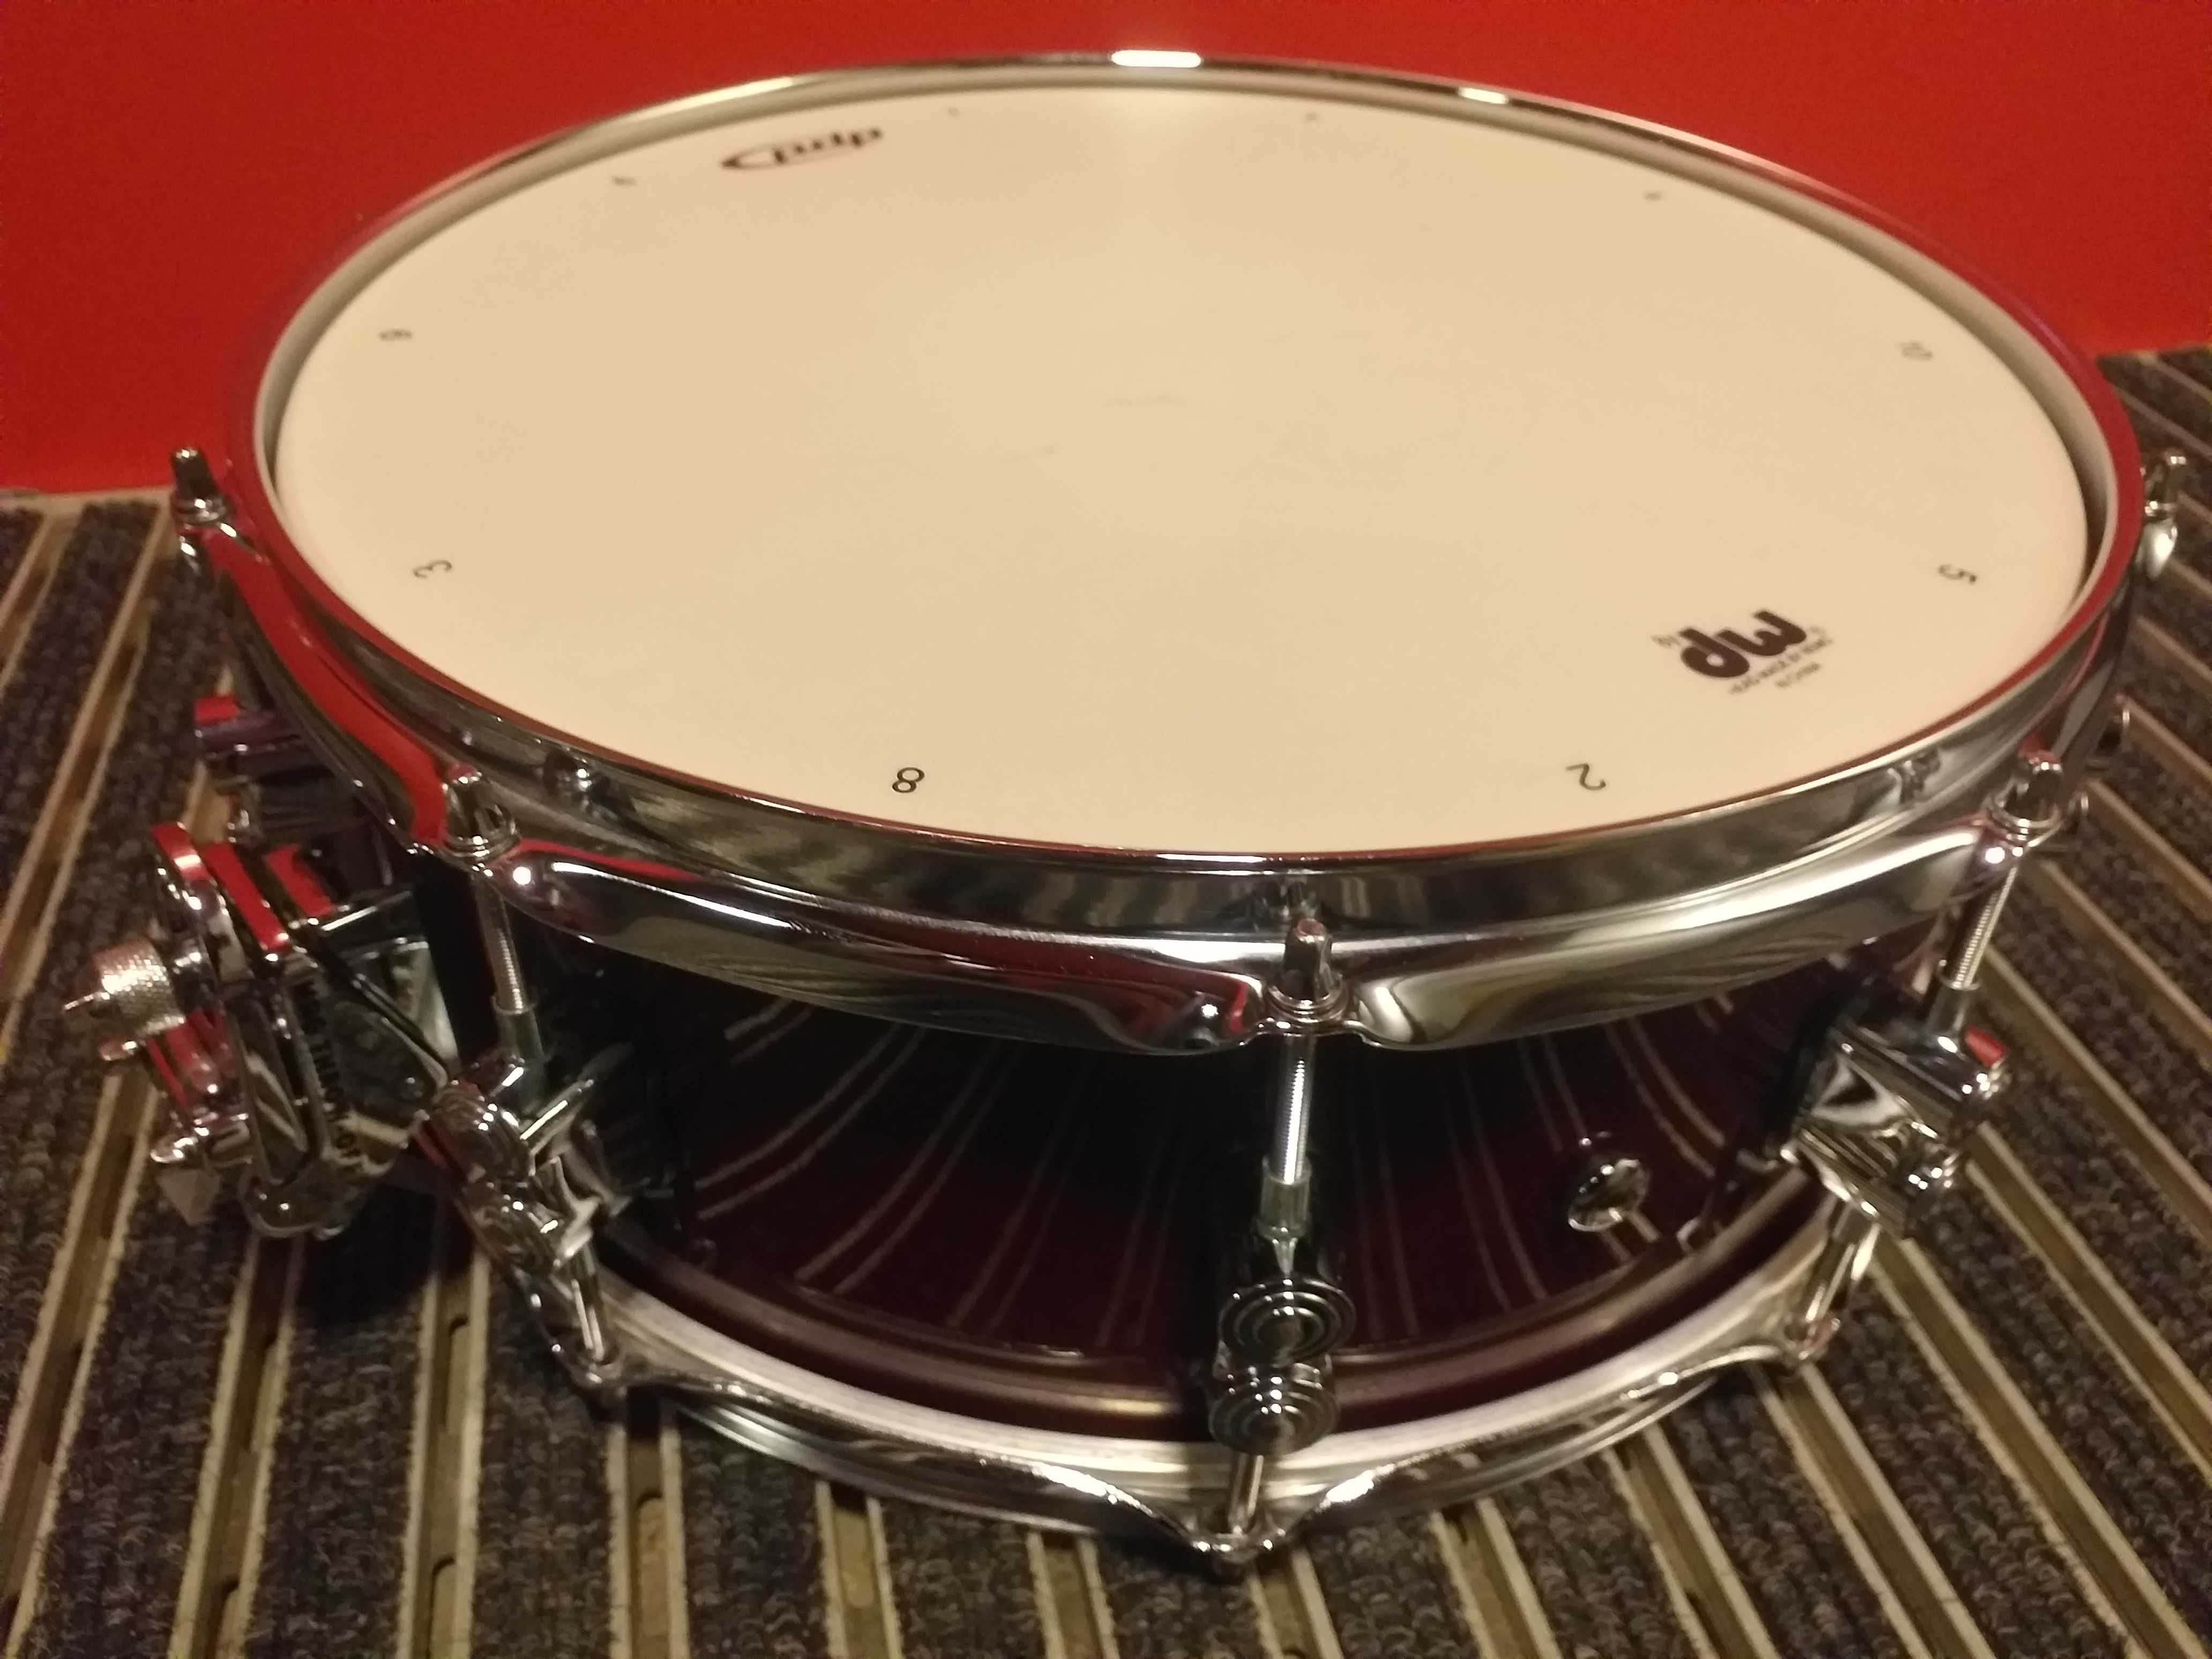 Werbel dw drums pdp Concept Maple Series 14x5,5 Cherry Stain